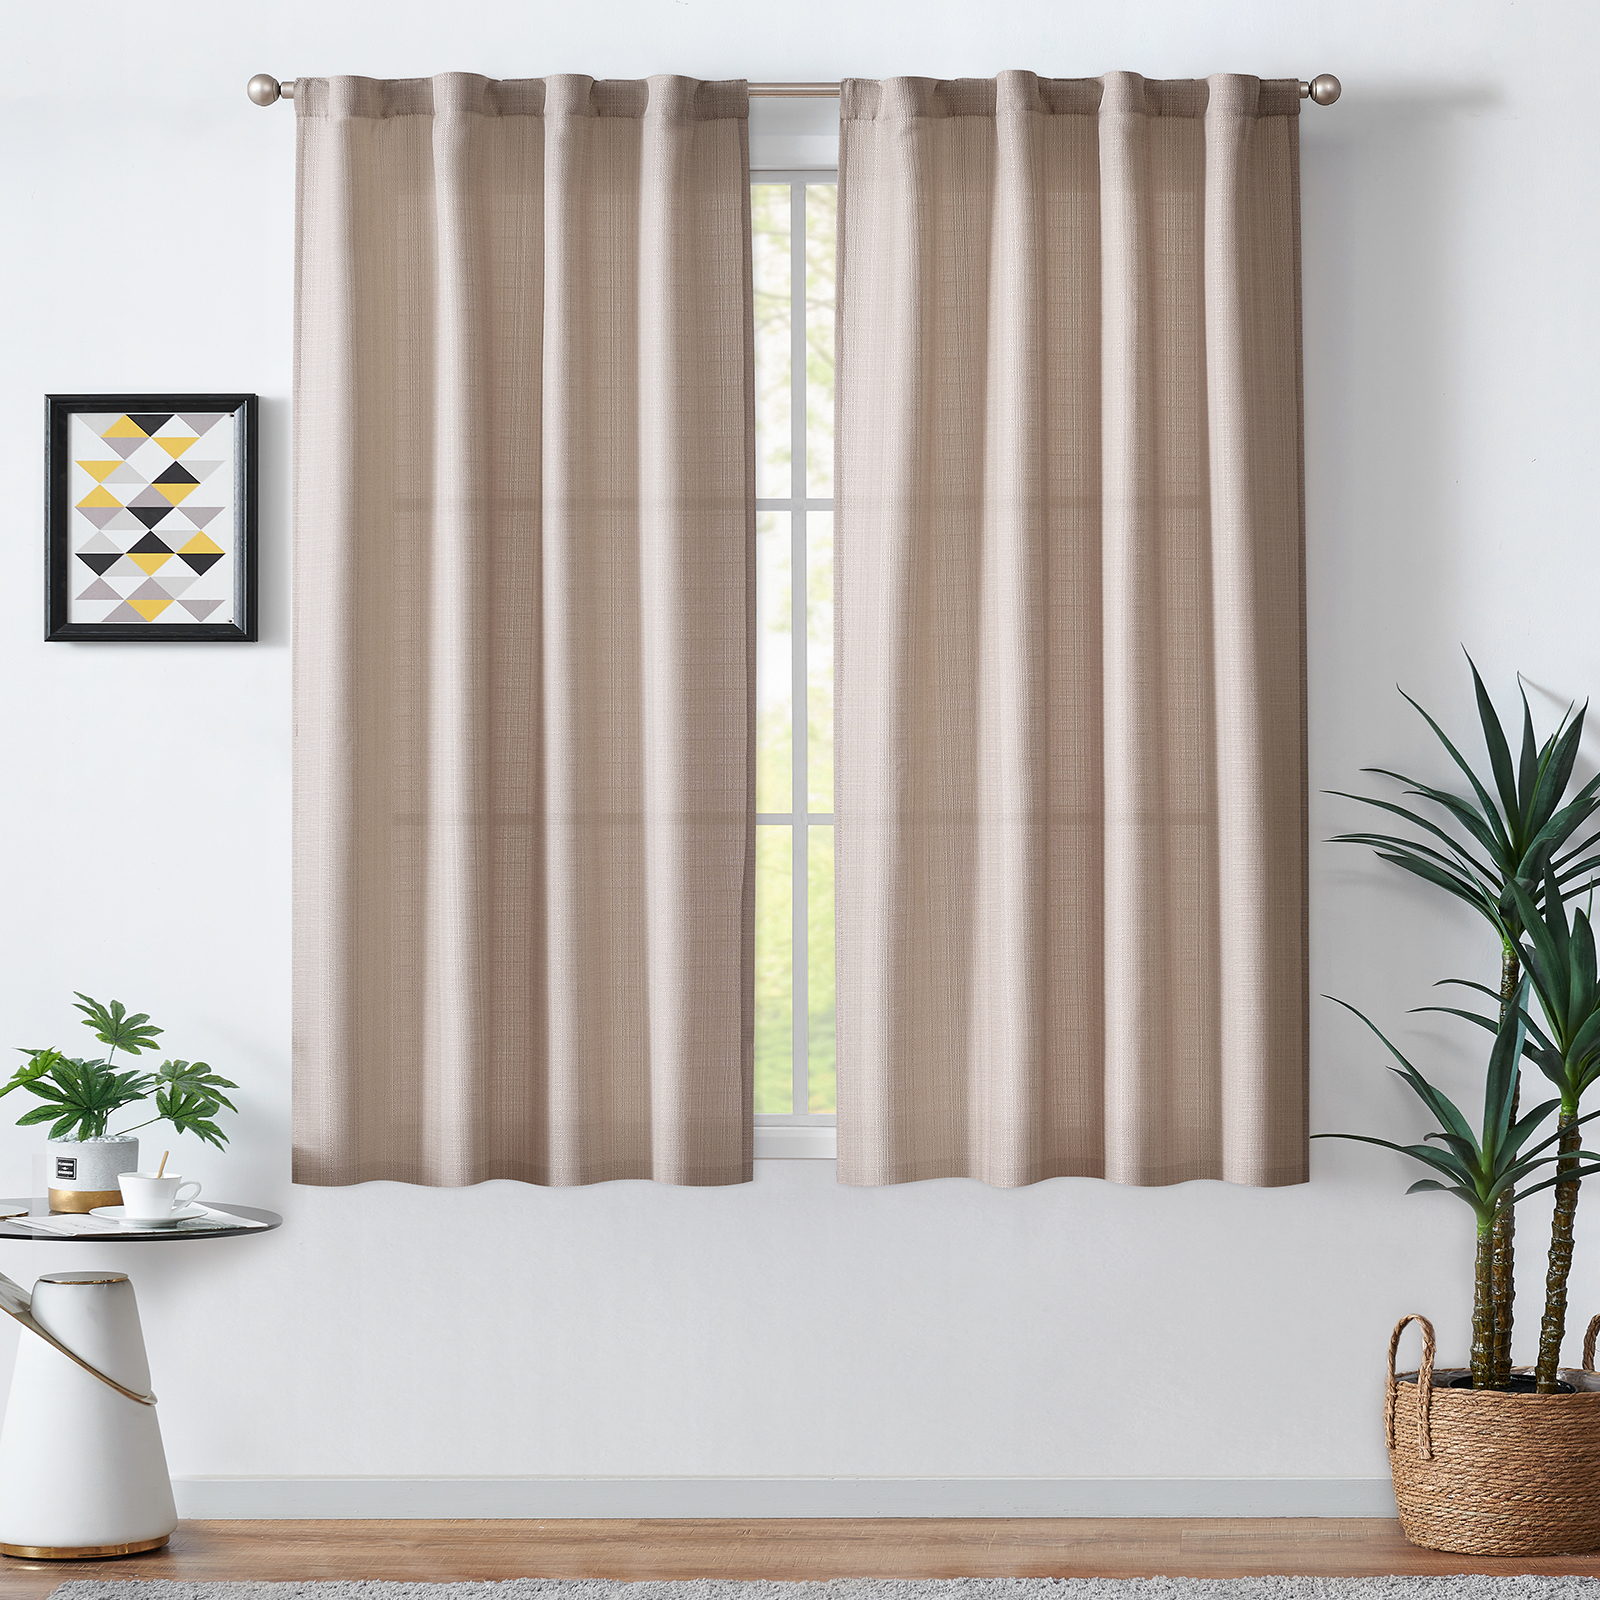 Curtainking Taupe Curtains for Living Room 63 inches Linen Textured Curtains Light Filtering Back Tab Curtains Casual Weave Back Tab Drapes 2 Panels - image 2 of 8